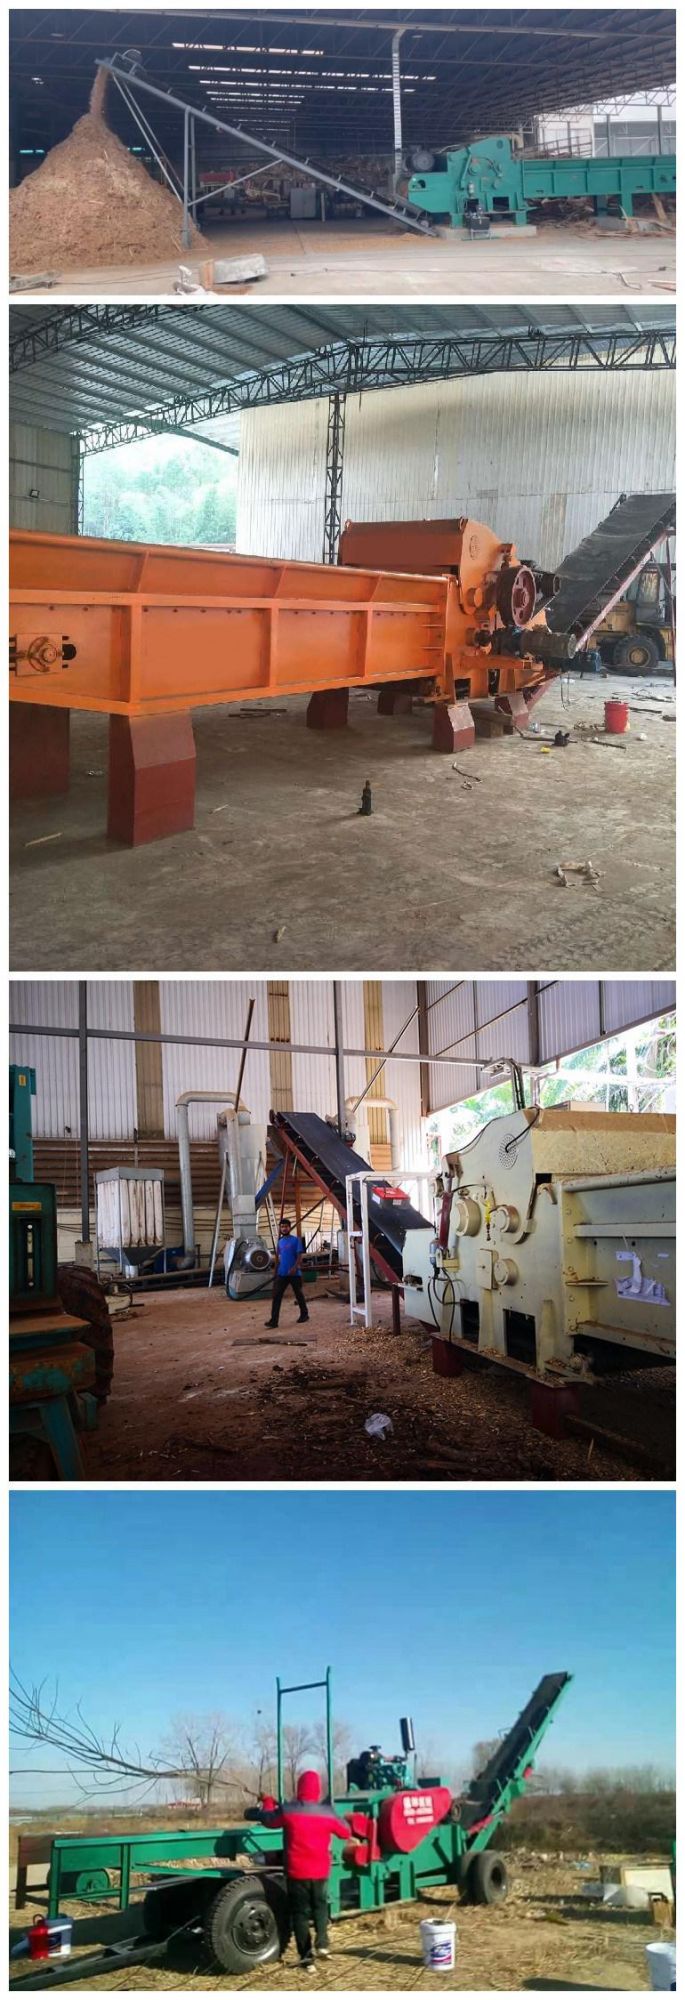 Automatic Wood Chipper Wood Crusher Wood Shredder with Diesel Engine and CE Certification